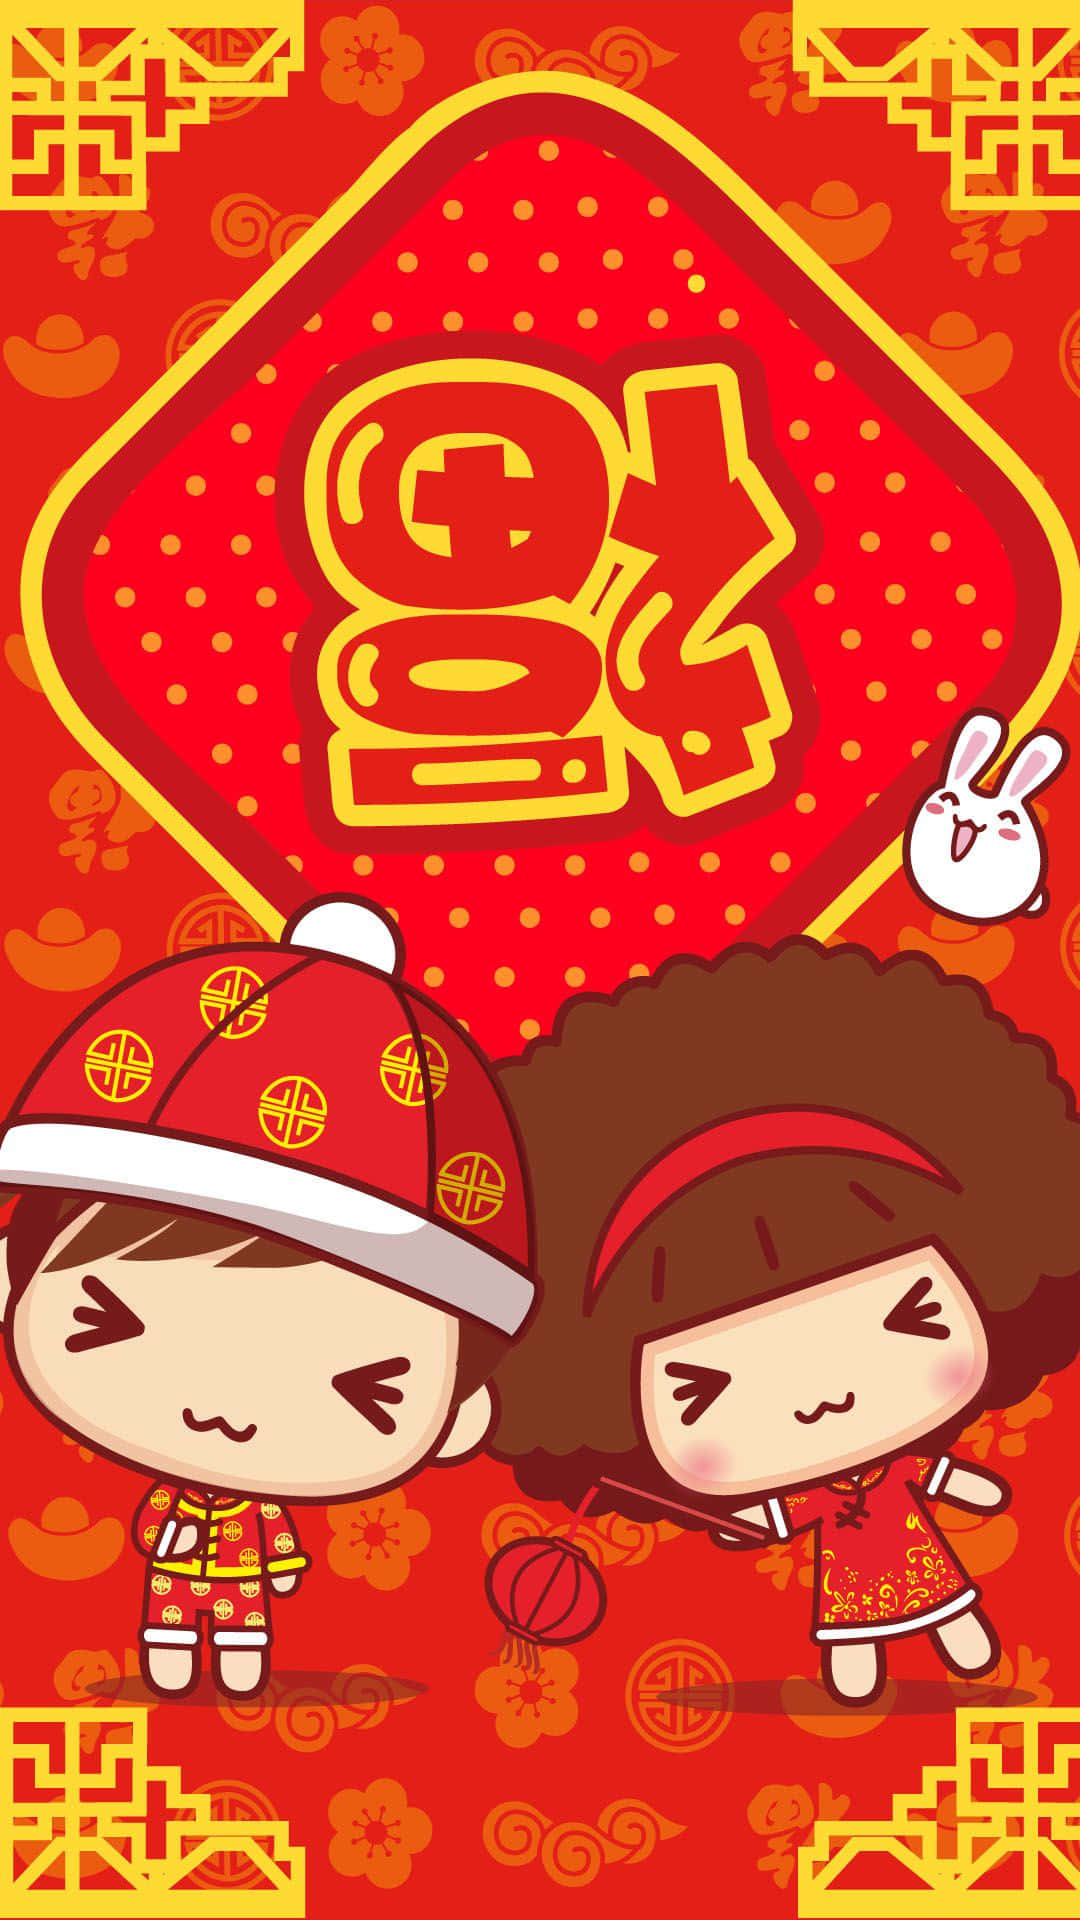 Free Chinese New Year Iphone Wallpaper Downloads, [100+] Chinese New Year  Iphone Wallpapers for FREE 